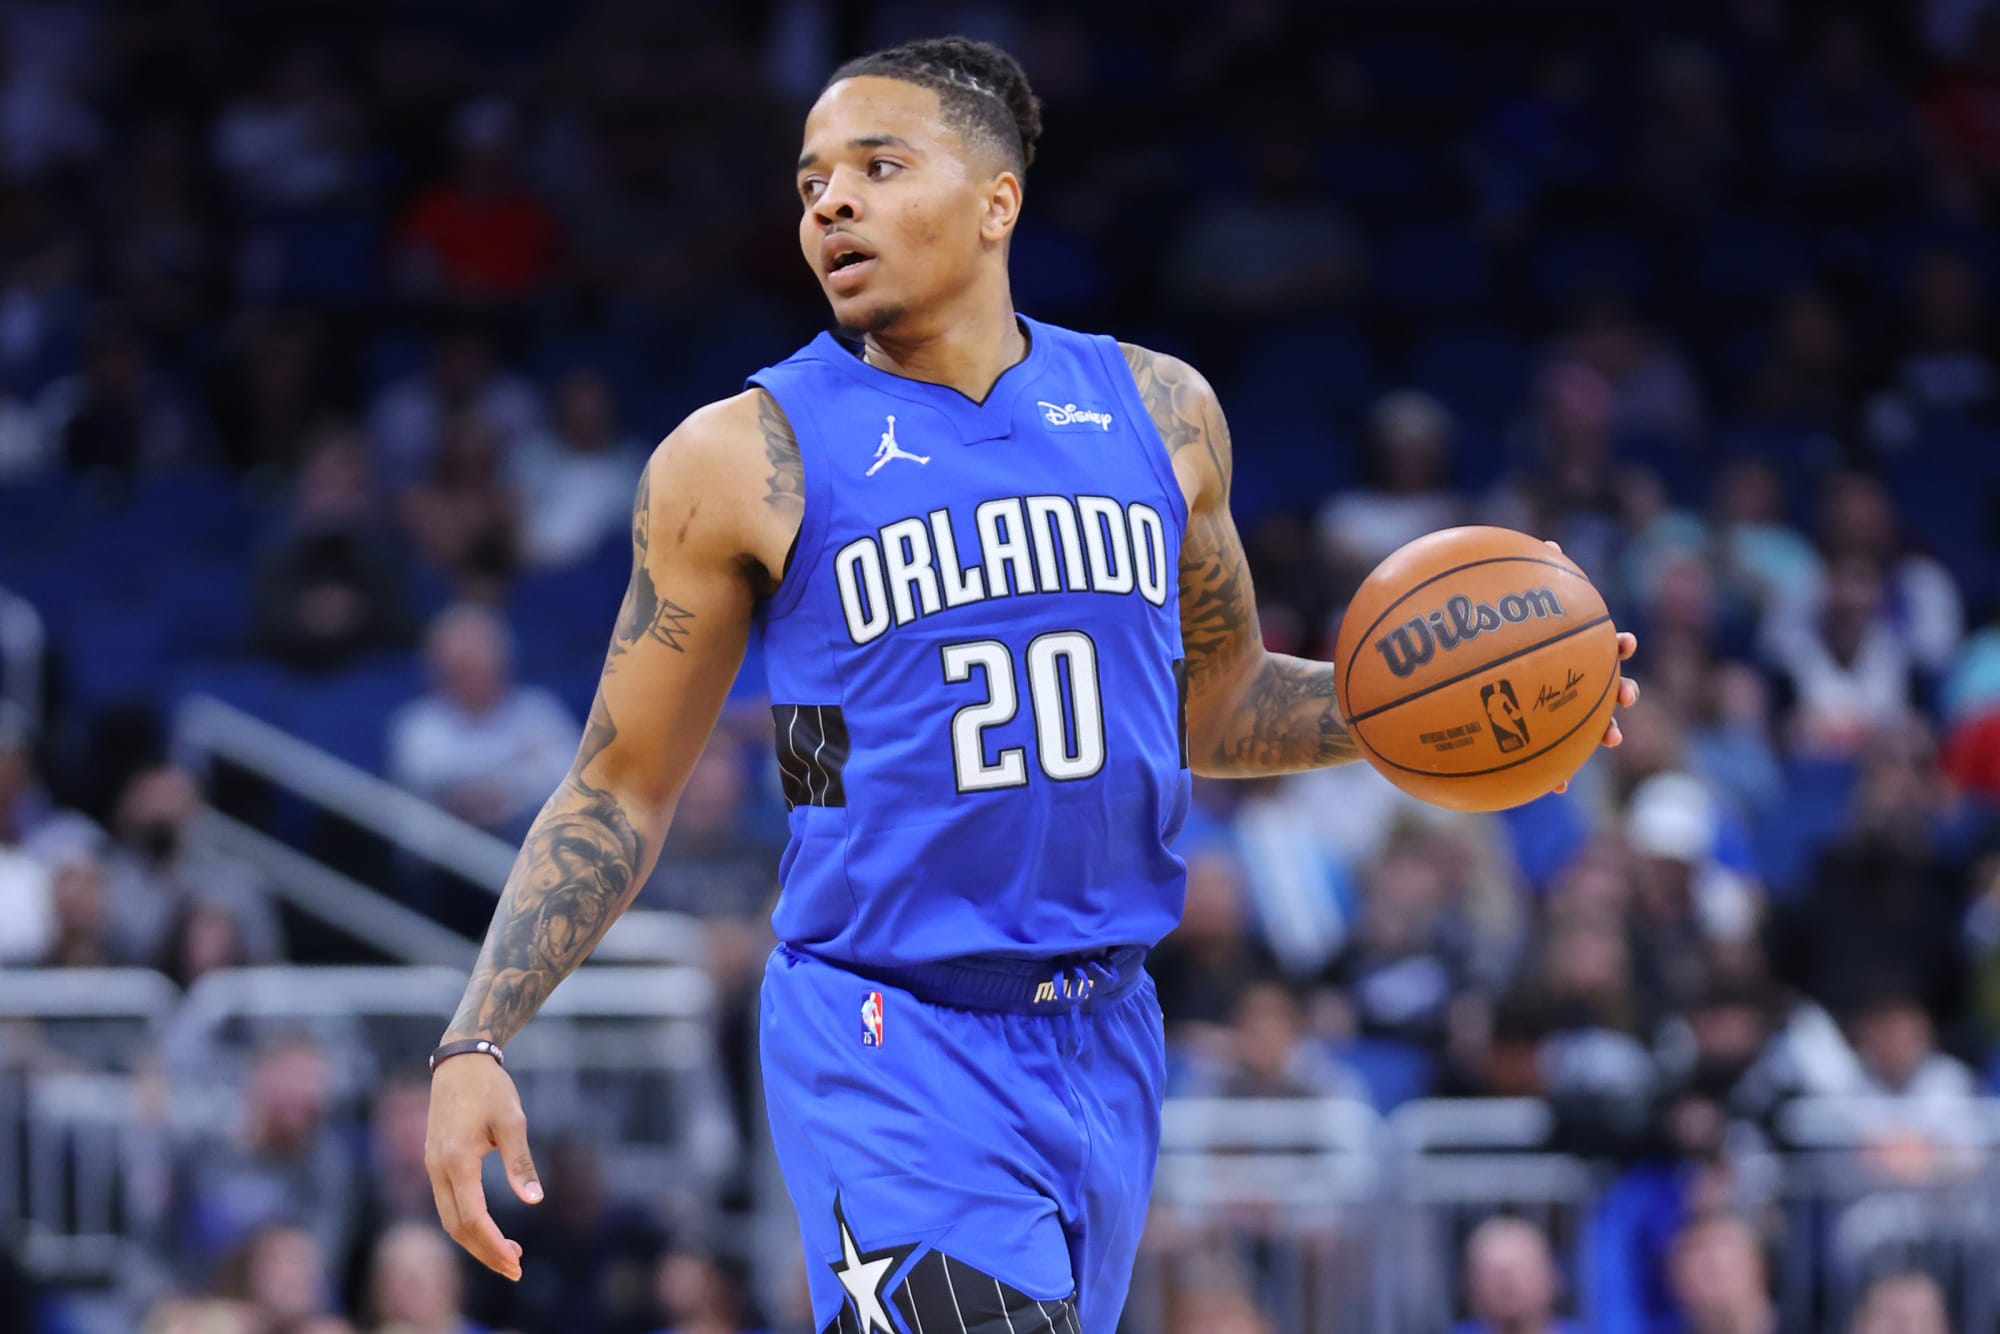 Orlando Magic cannot wait for the perfect time to bring Markelle Fultz back